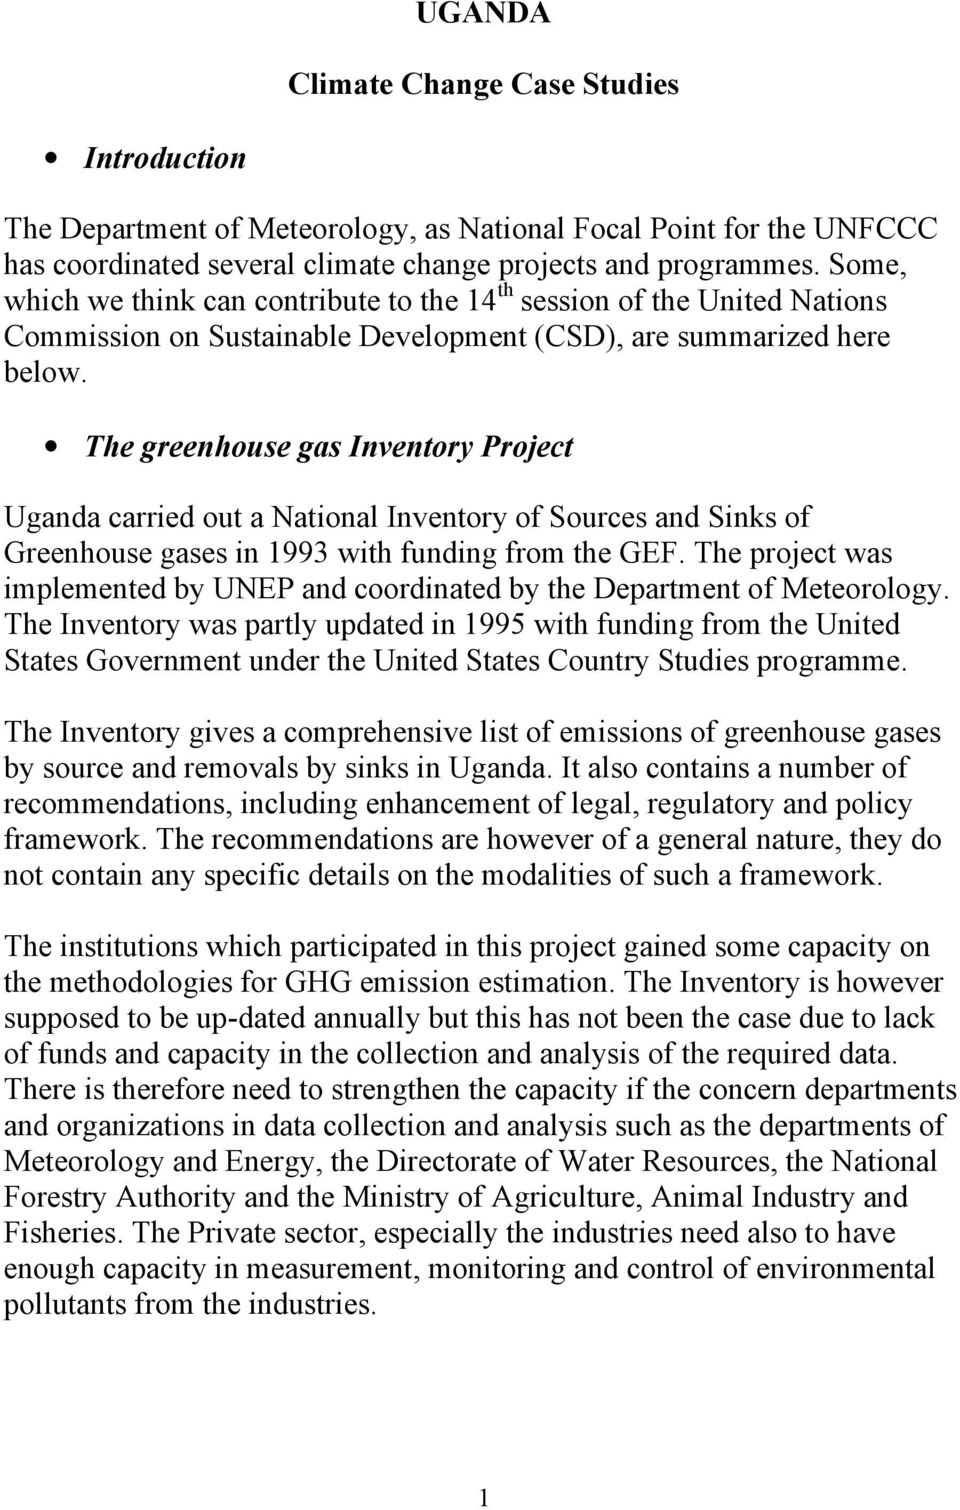 The greenhouse gas Inventory Project Uganda carried out a National Inventory of Sources and Sinks of Greenhouse gases in 1993 with funding from the GEF.